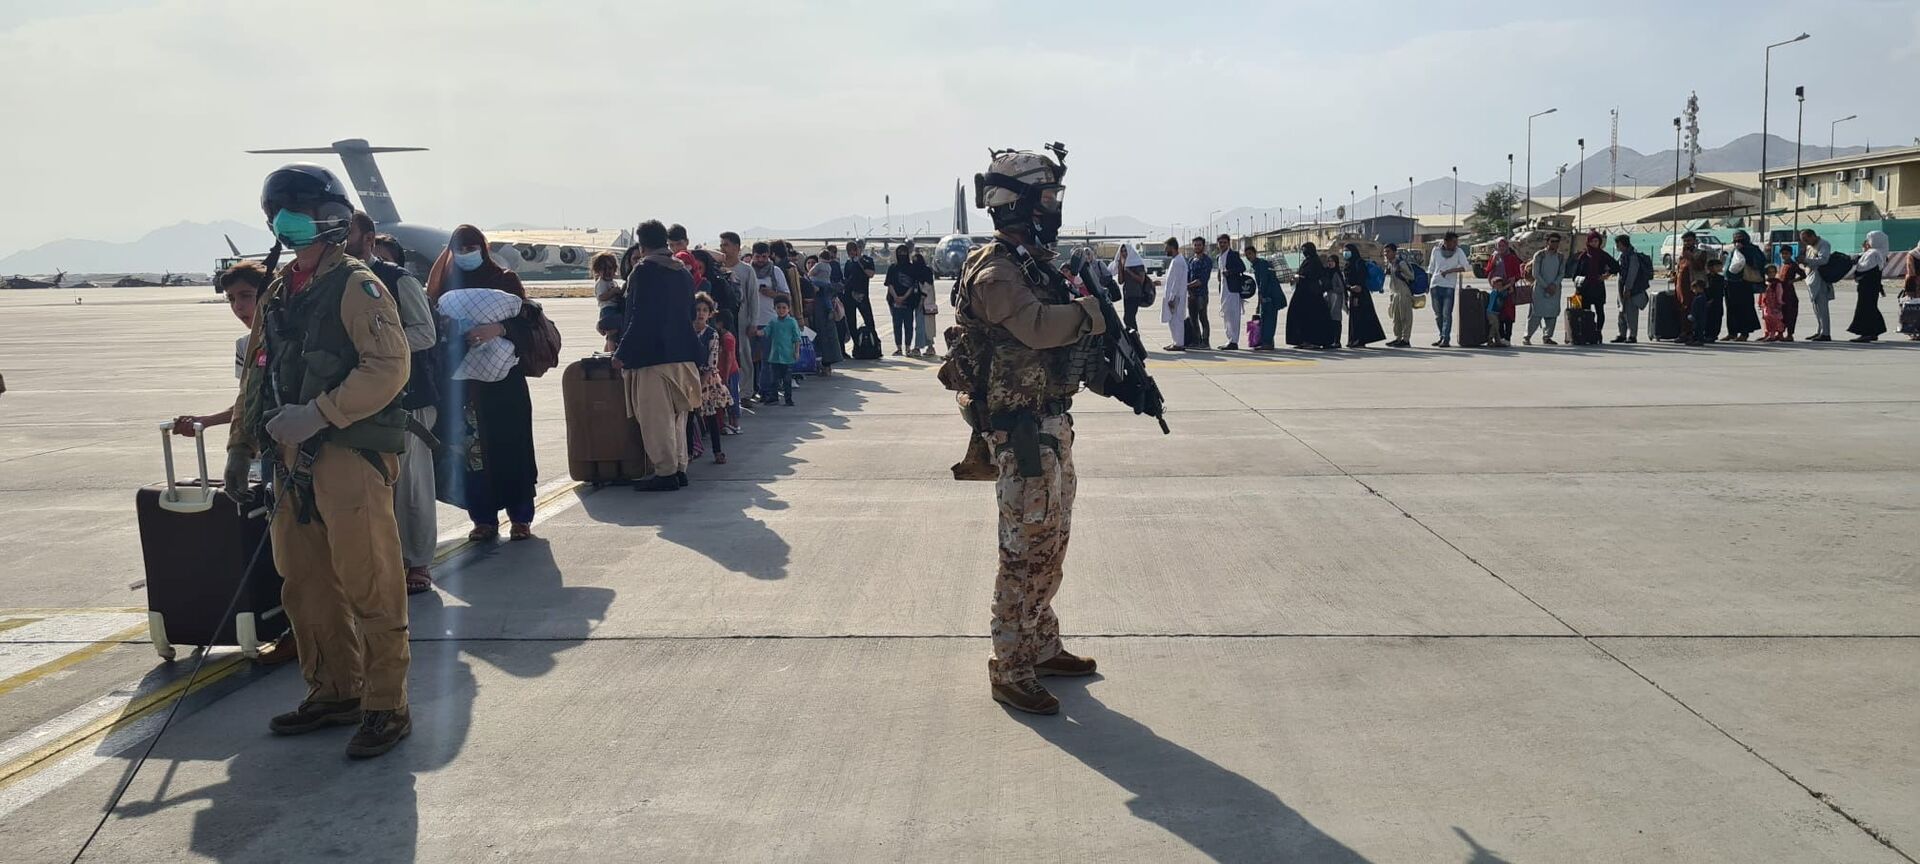 Afghan evacuees queue before boarding Italy's military aircraft C130J during evacuation at Kabul's airport, Afghanistan, August 22, 2021 - Sputnik International, 1920, 07.09.2021